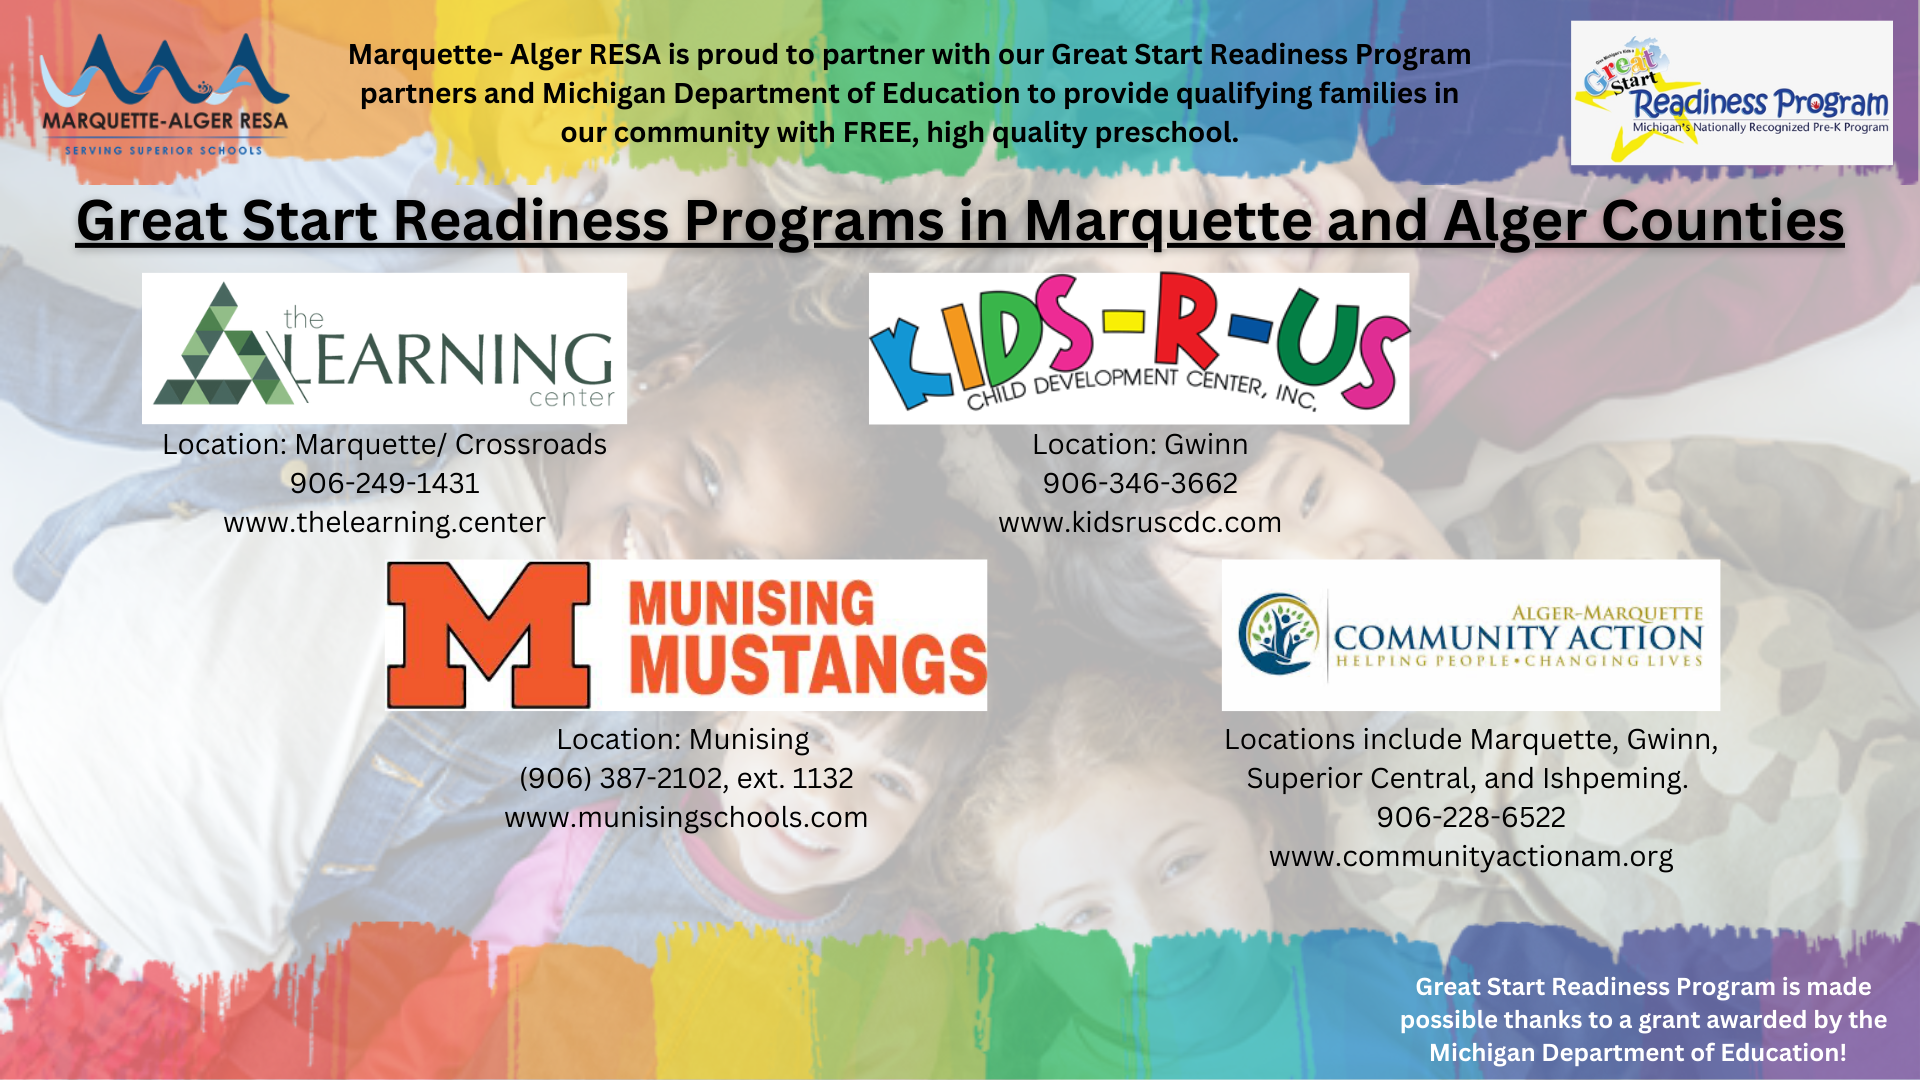 Great Start Readiness Programs in Marquette and Alger Counties